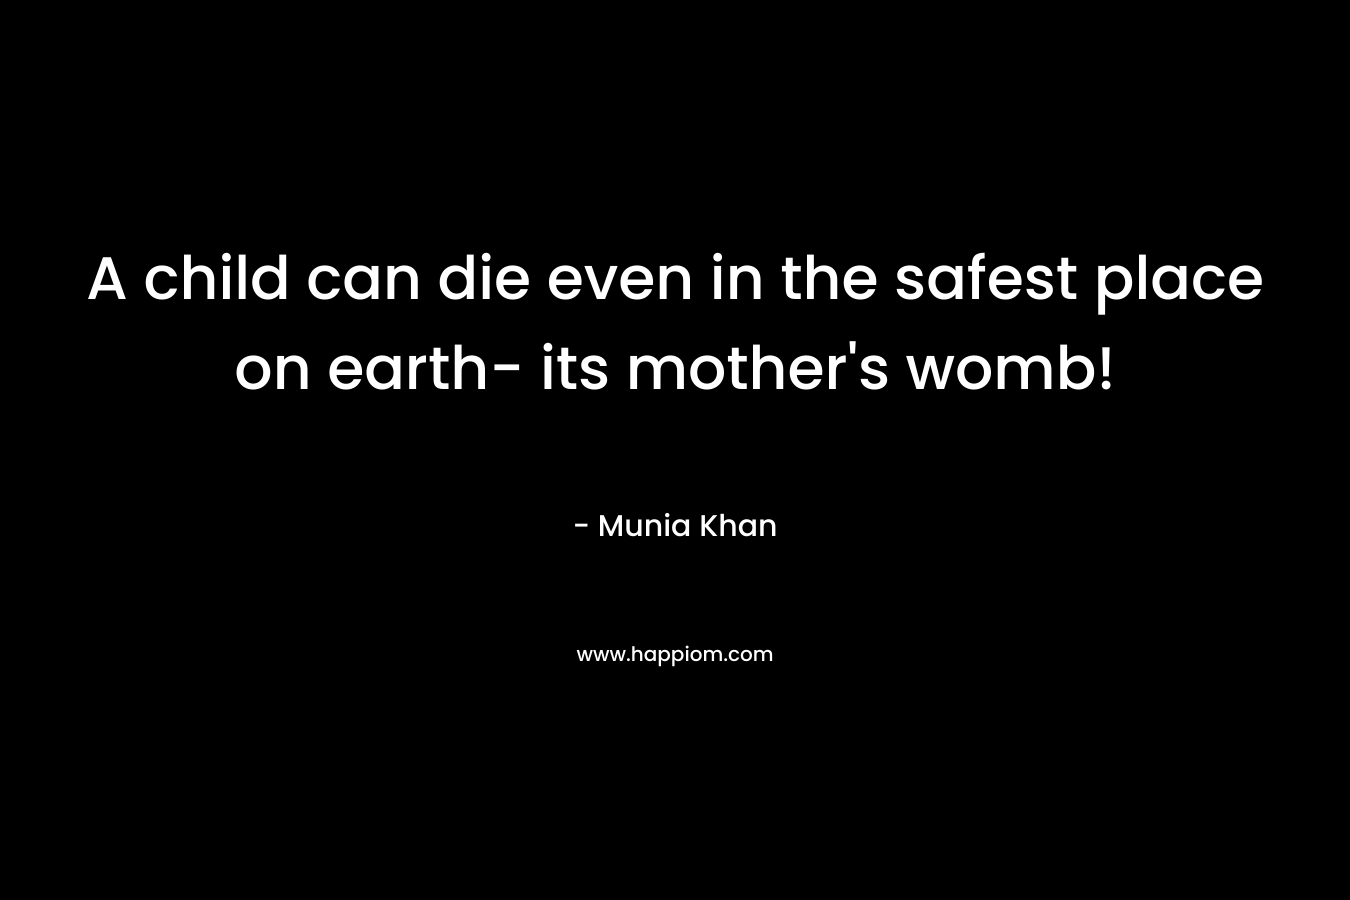 A child can die even in the safest place on earth- its mother's womb!